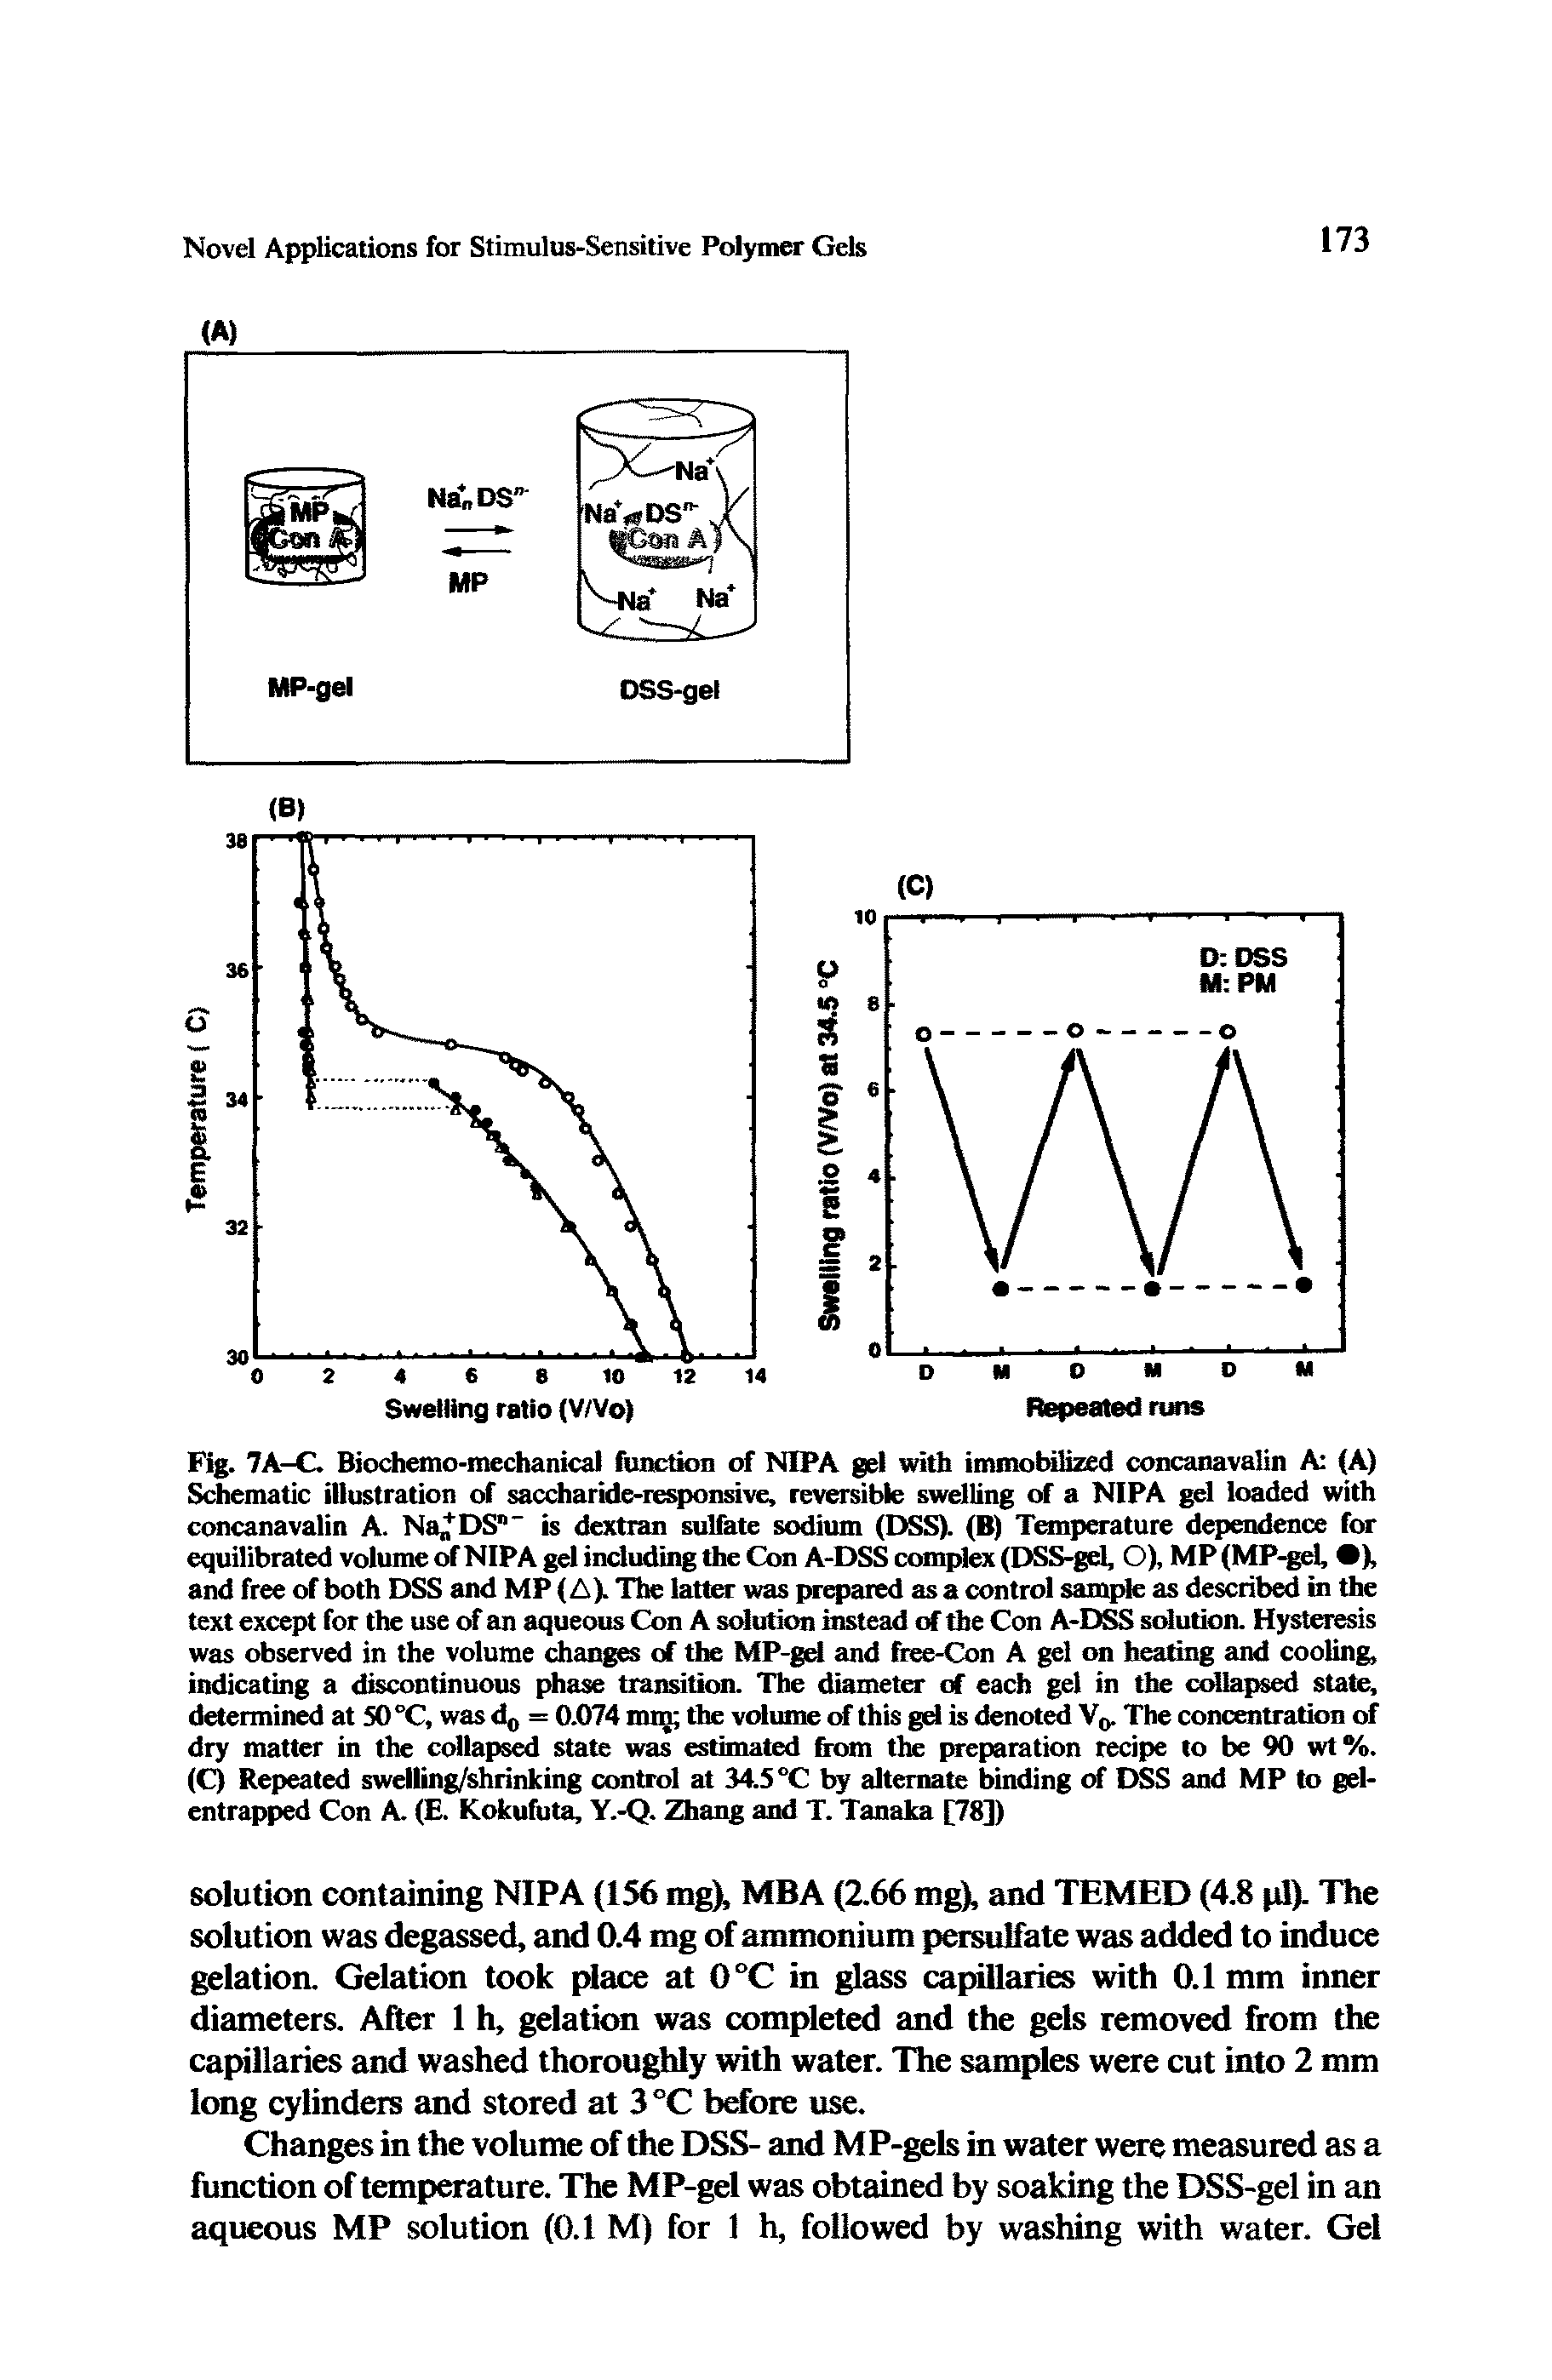 Fig. 7A—C. Biochemo-mechanical function of NIPA gel with immobilized concanavalin A (A) Schematic illustration of saccharide-responsive, reversible swelling of a NIPA gel loaded with concanavalin A. Na DS"- is dextran sulfate sodium (DSS). (B) Temperature dependence for equilibrated volume of NIPA gel including the Con A-DSS complex (DSS-gel, O), MP (MP-gel, ), and free of both DSS and MP (A). The latter was prepared as a control sample as described in the text except for the use of an aqueous Con A solution instead of the Con A-DSS solution. Hysteresis was observed in the volume changes of the MP-gel and free-Con A gel on heating and cooling, indicating a discontinuous phase transition. The diameter of each gel in the collapsed state, determined at 50 °C, was d0 = 0.074 mm the volume of this gel is denoted Vp. The concentration of dry matter in the collapsed state was estimated from the preparation recipe to be 90 wt%. (C) Repeated swelling/shrinking control at 34.5 °C by alternate binding of DSS and MP to gel-entrapped Con A. (E. Kokufuta, Y.-Q. Zhang and T. Tanaka [78])...